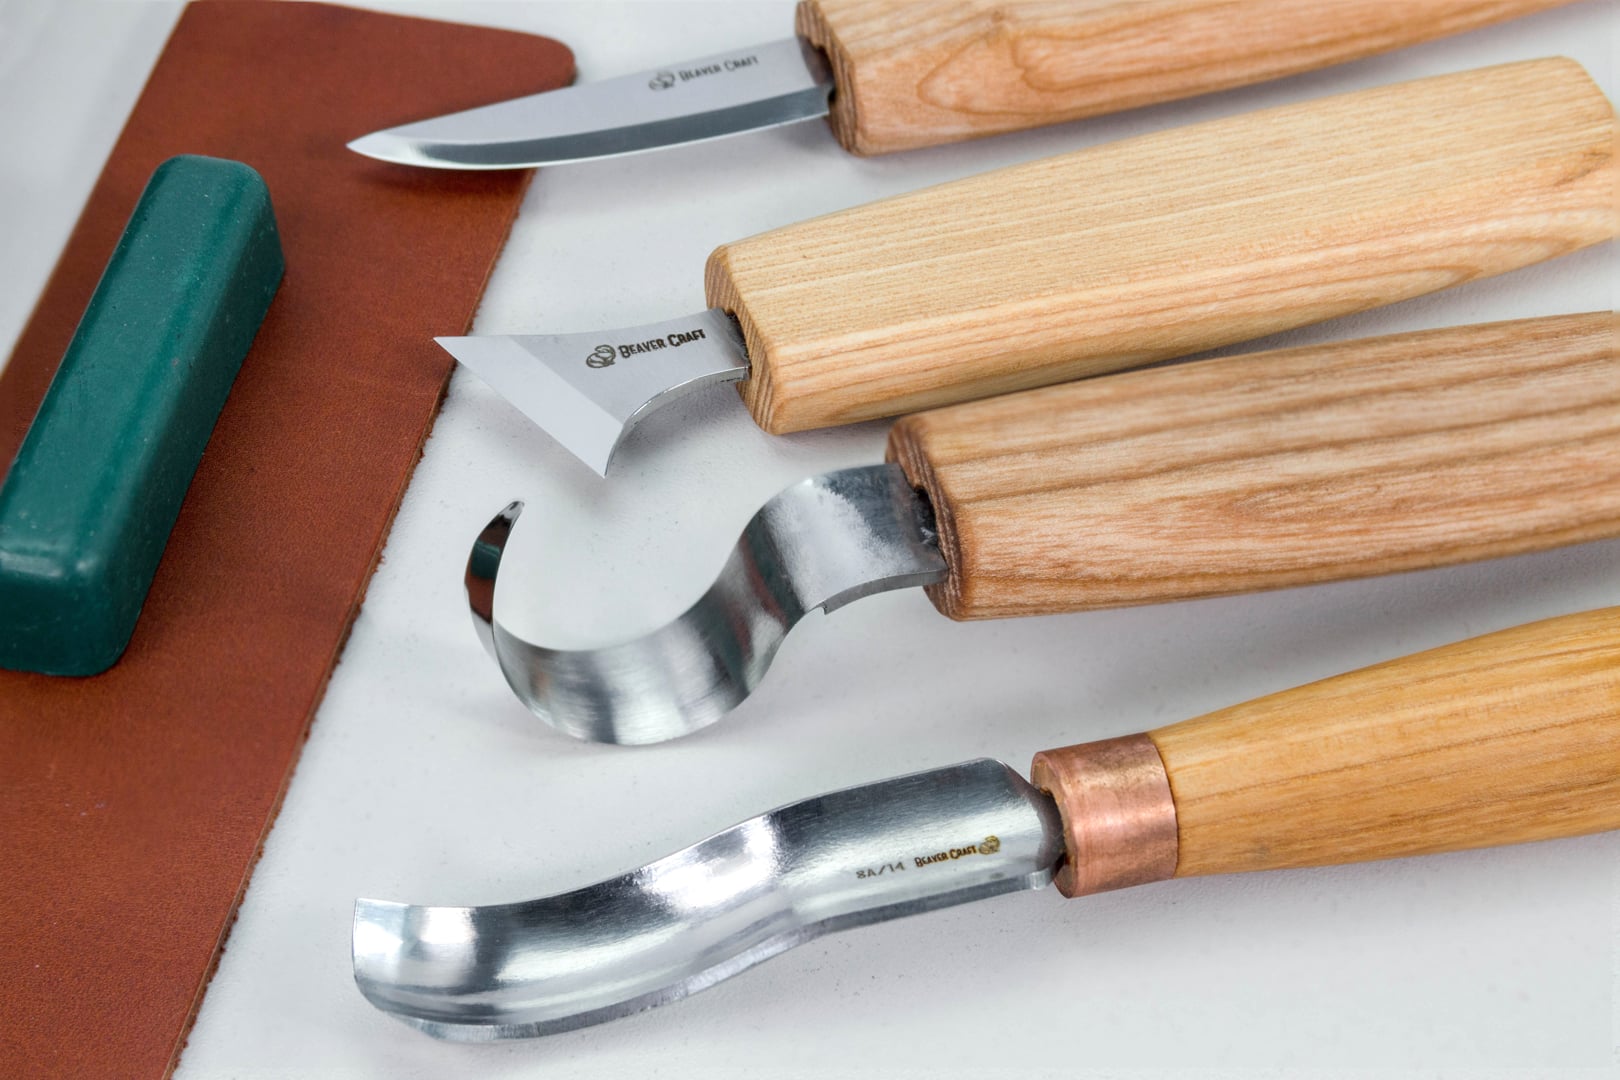 S19L book - Spoon Carving Set of 4 Tools in a Book Case (left-handed)